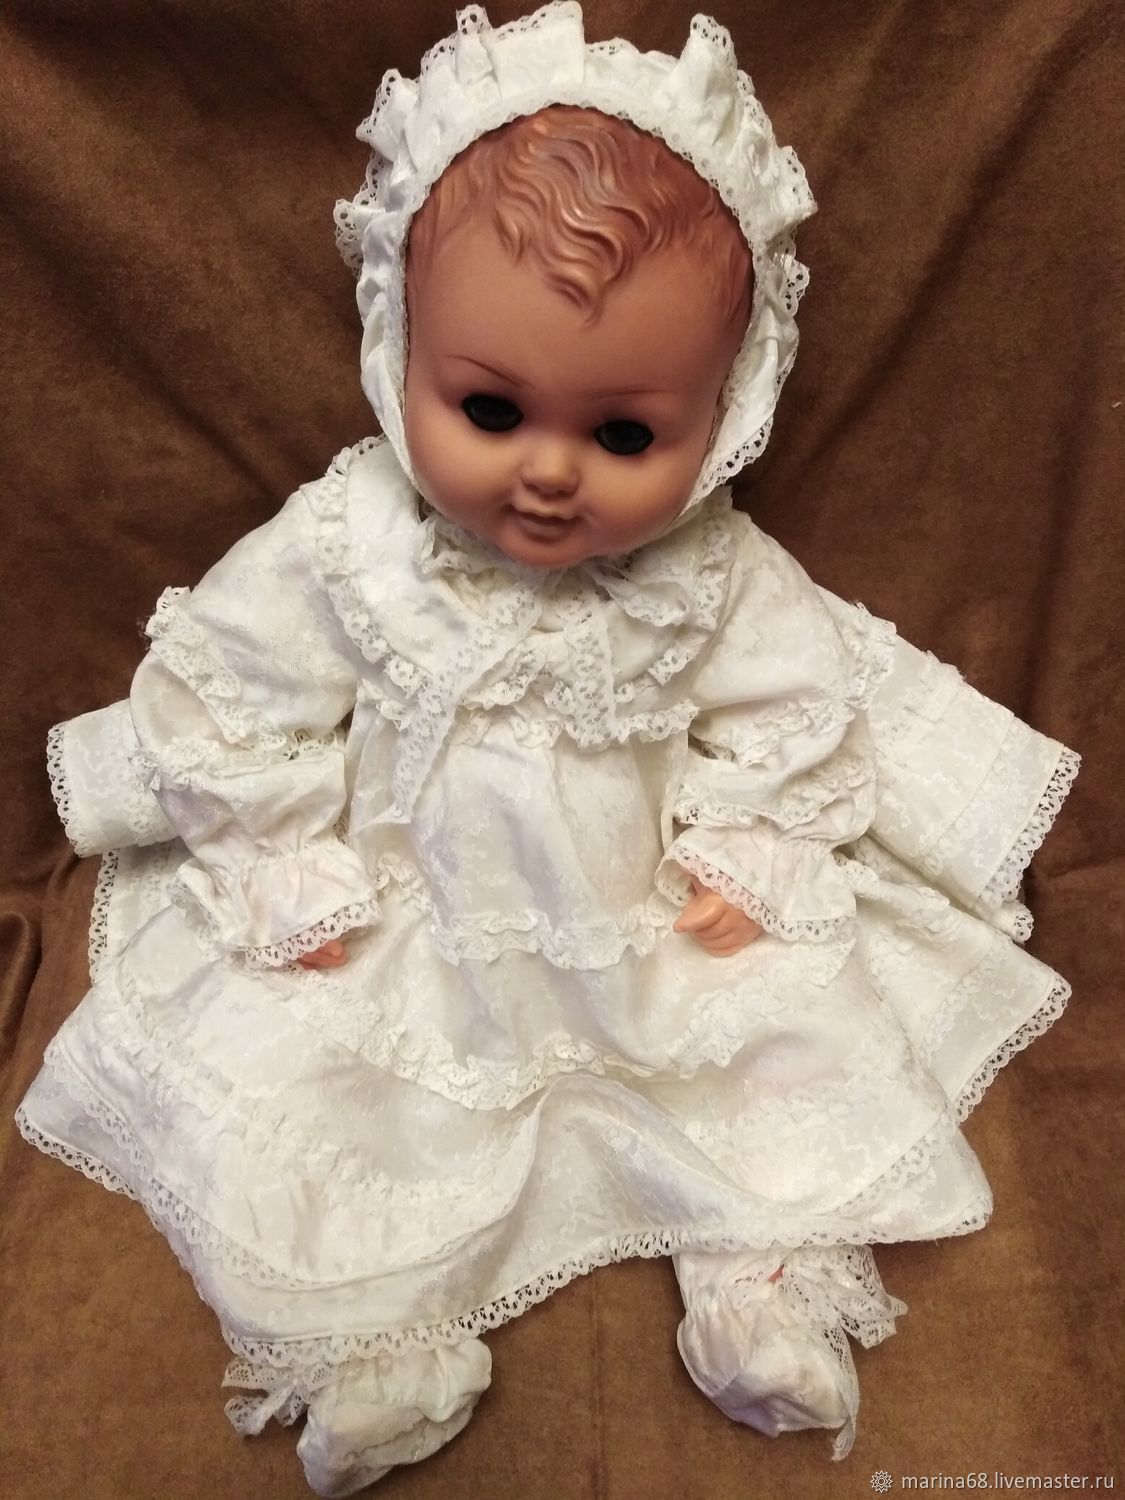 real baby doll 80s